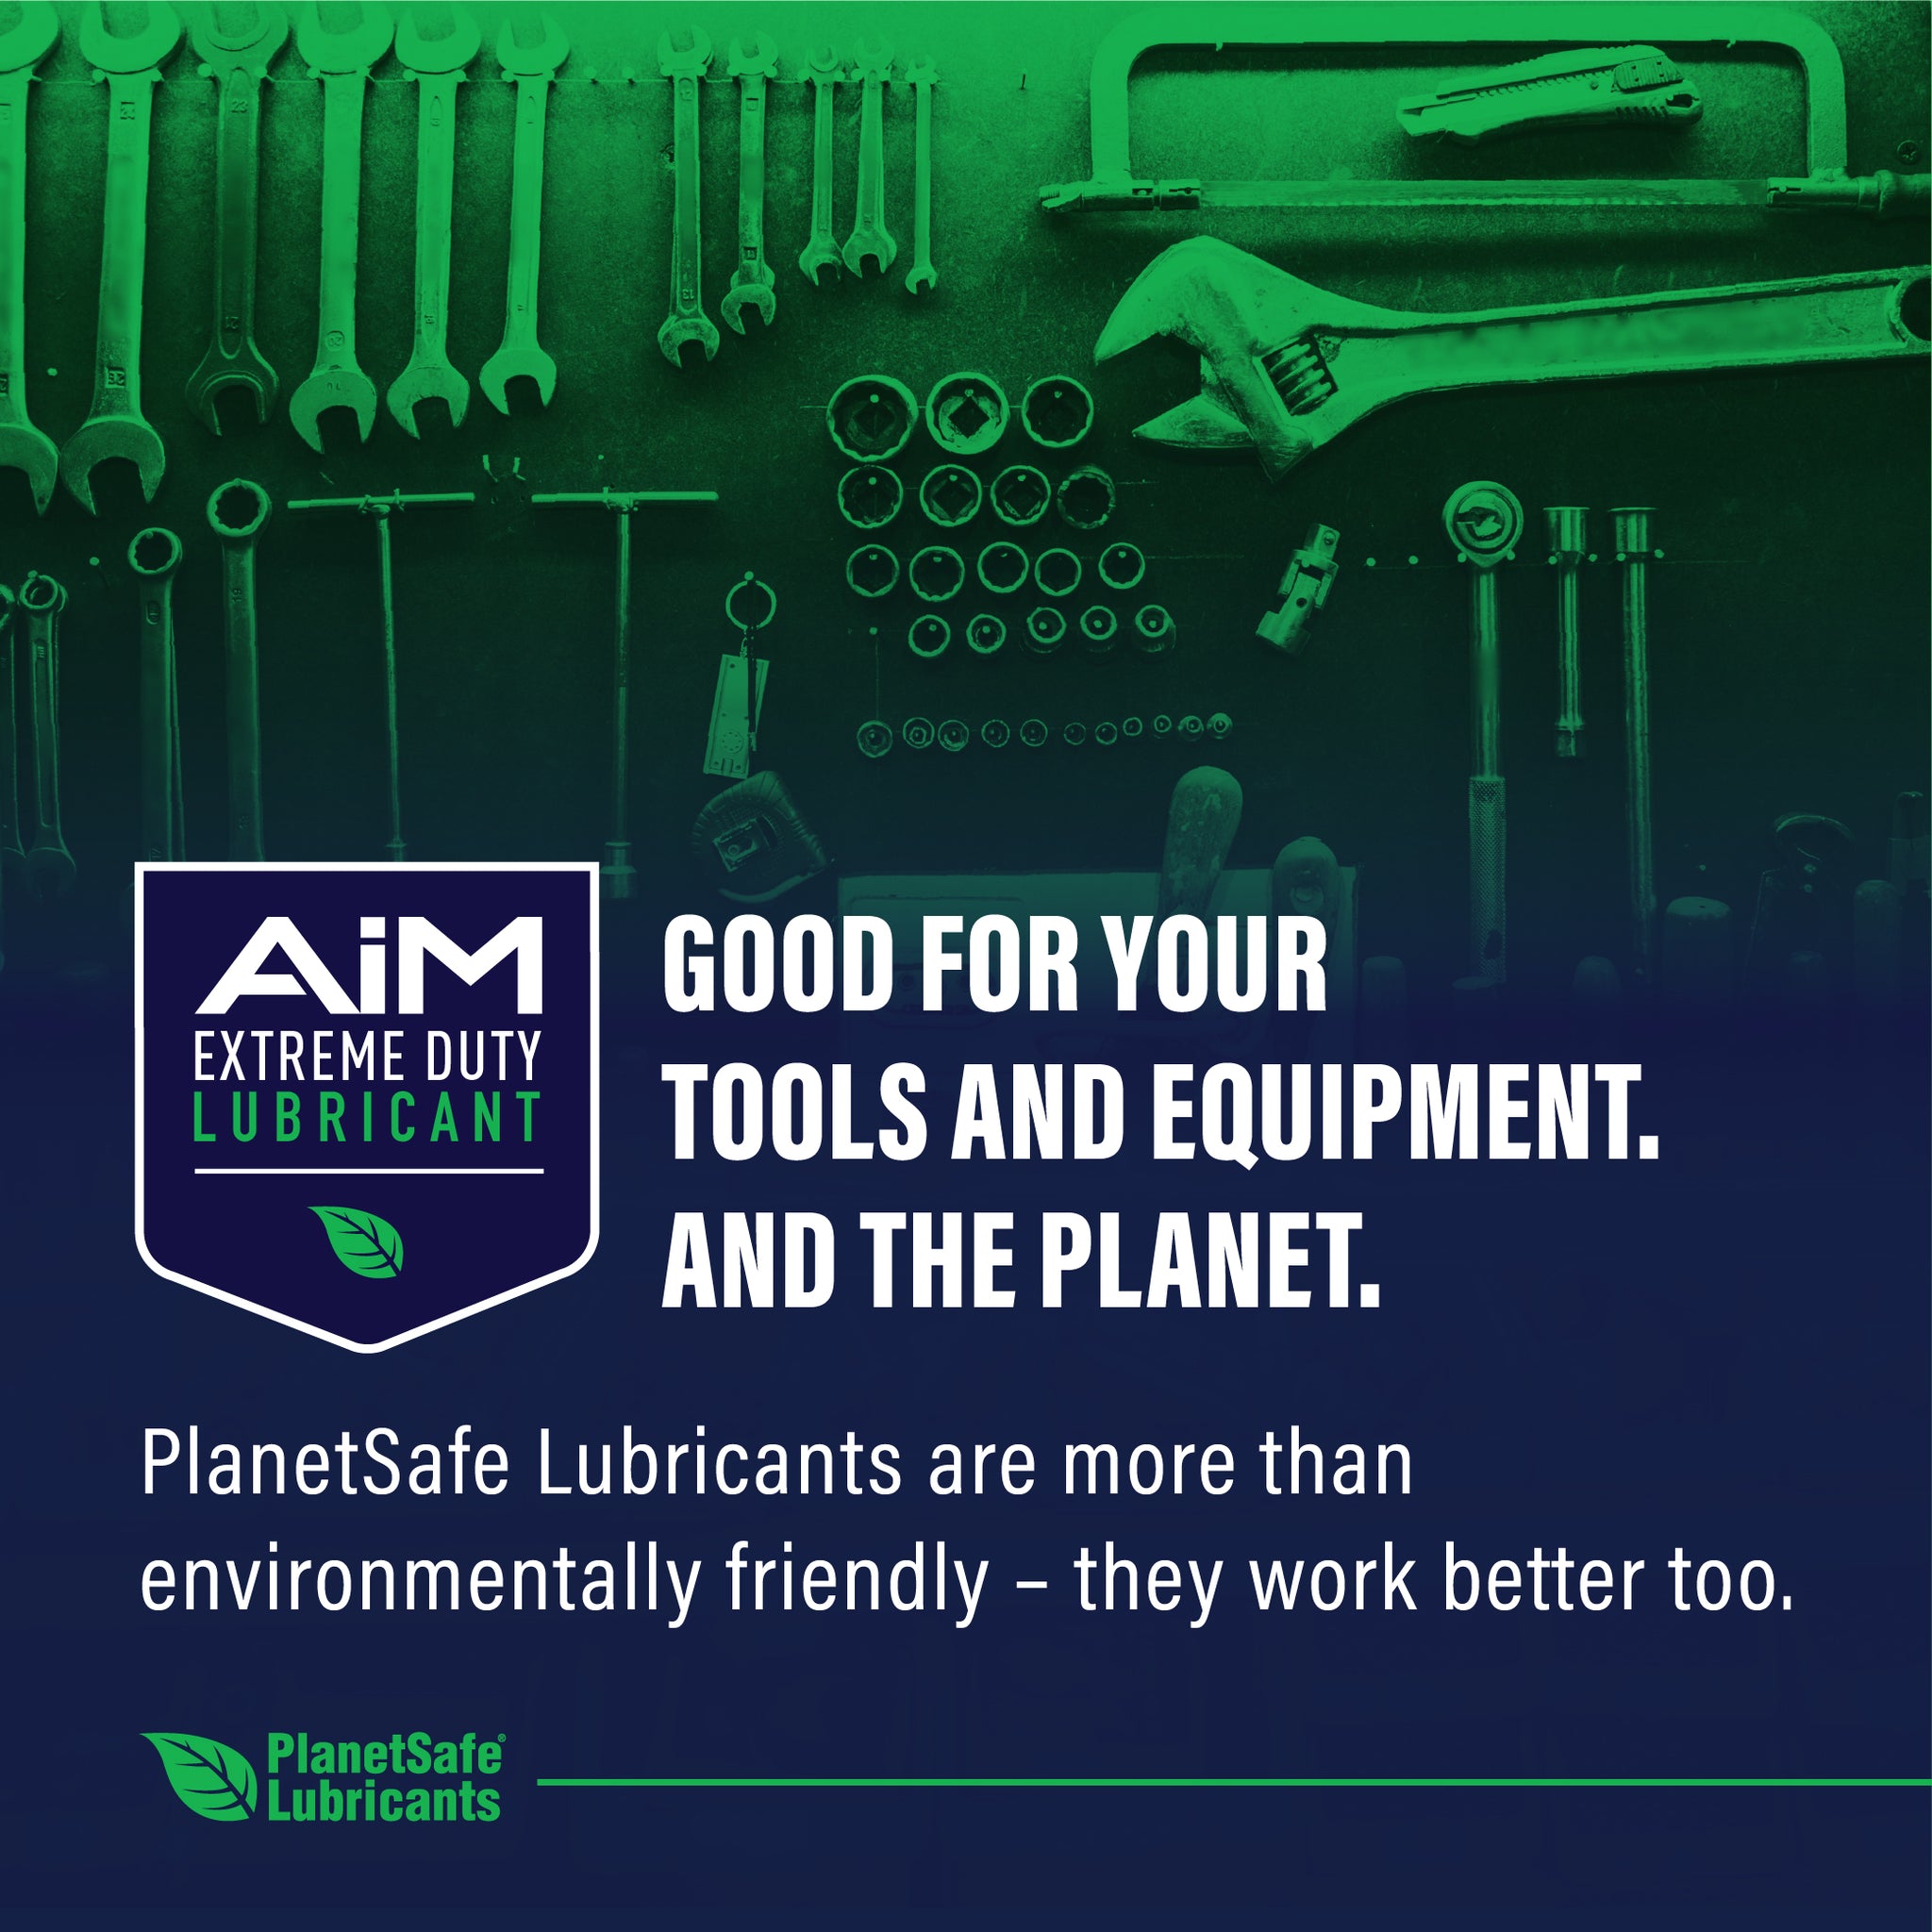 PlanetSafe AIM Extreme Duty Lubricant 1oz - Worlds best all purpose lube - home repair auto - non-toxic -rust removal- for tools chains hinges metal